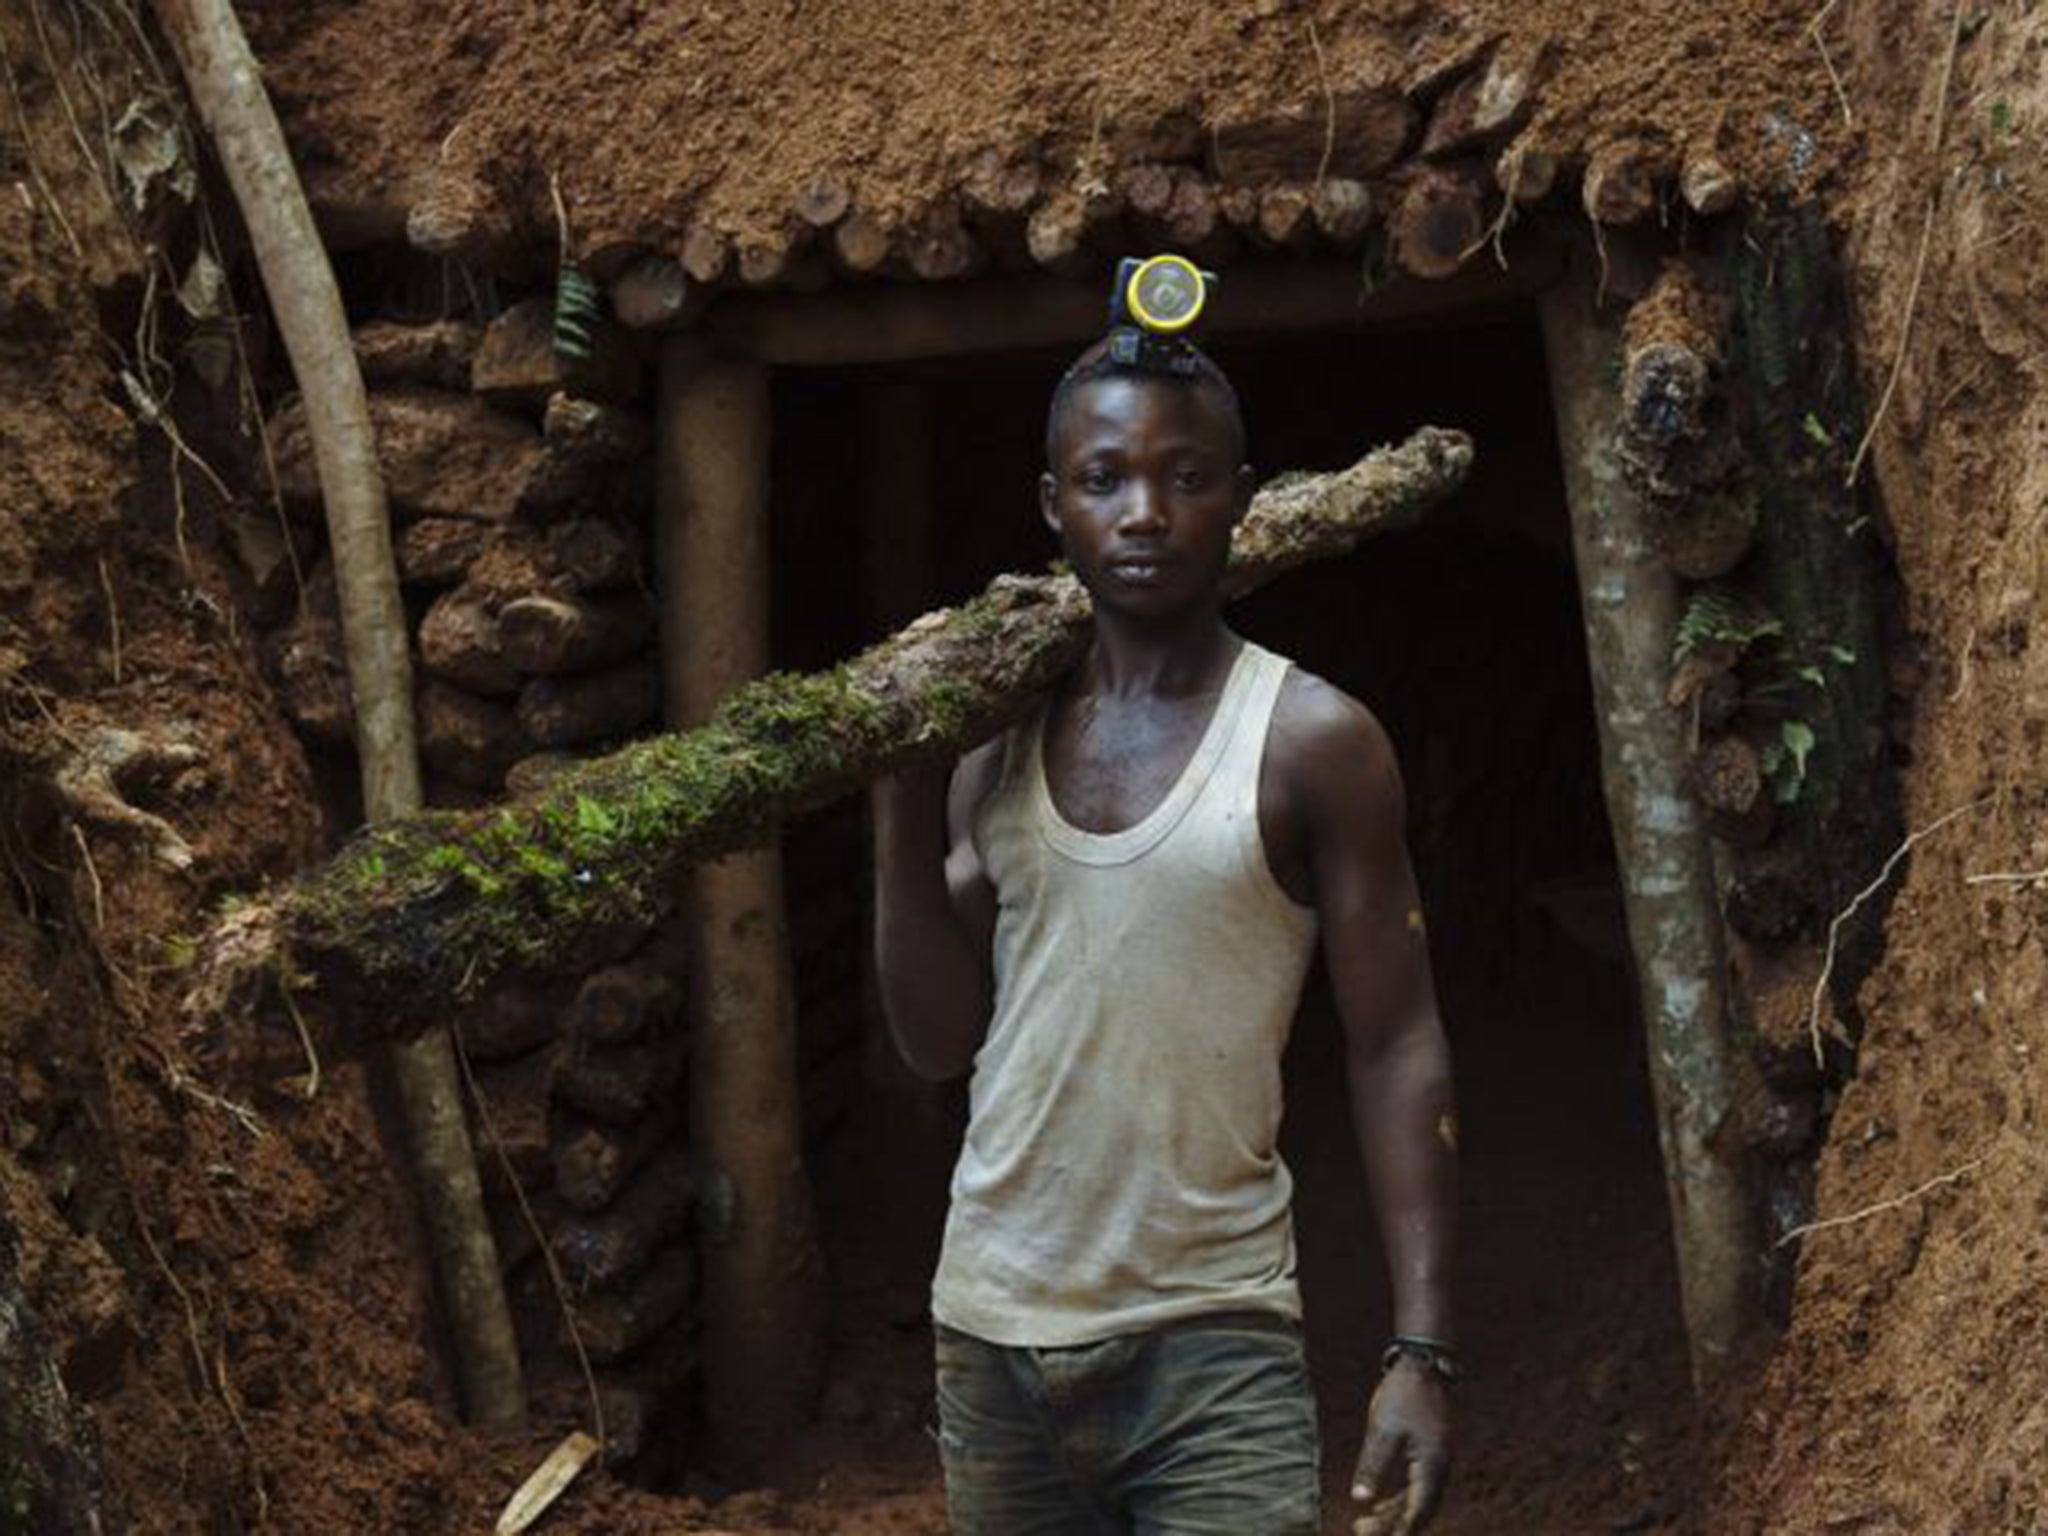 The cassiterite mines have been attacked by armed groups preying on eastern DRC’s mineral sector